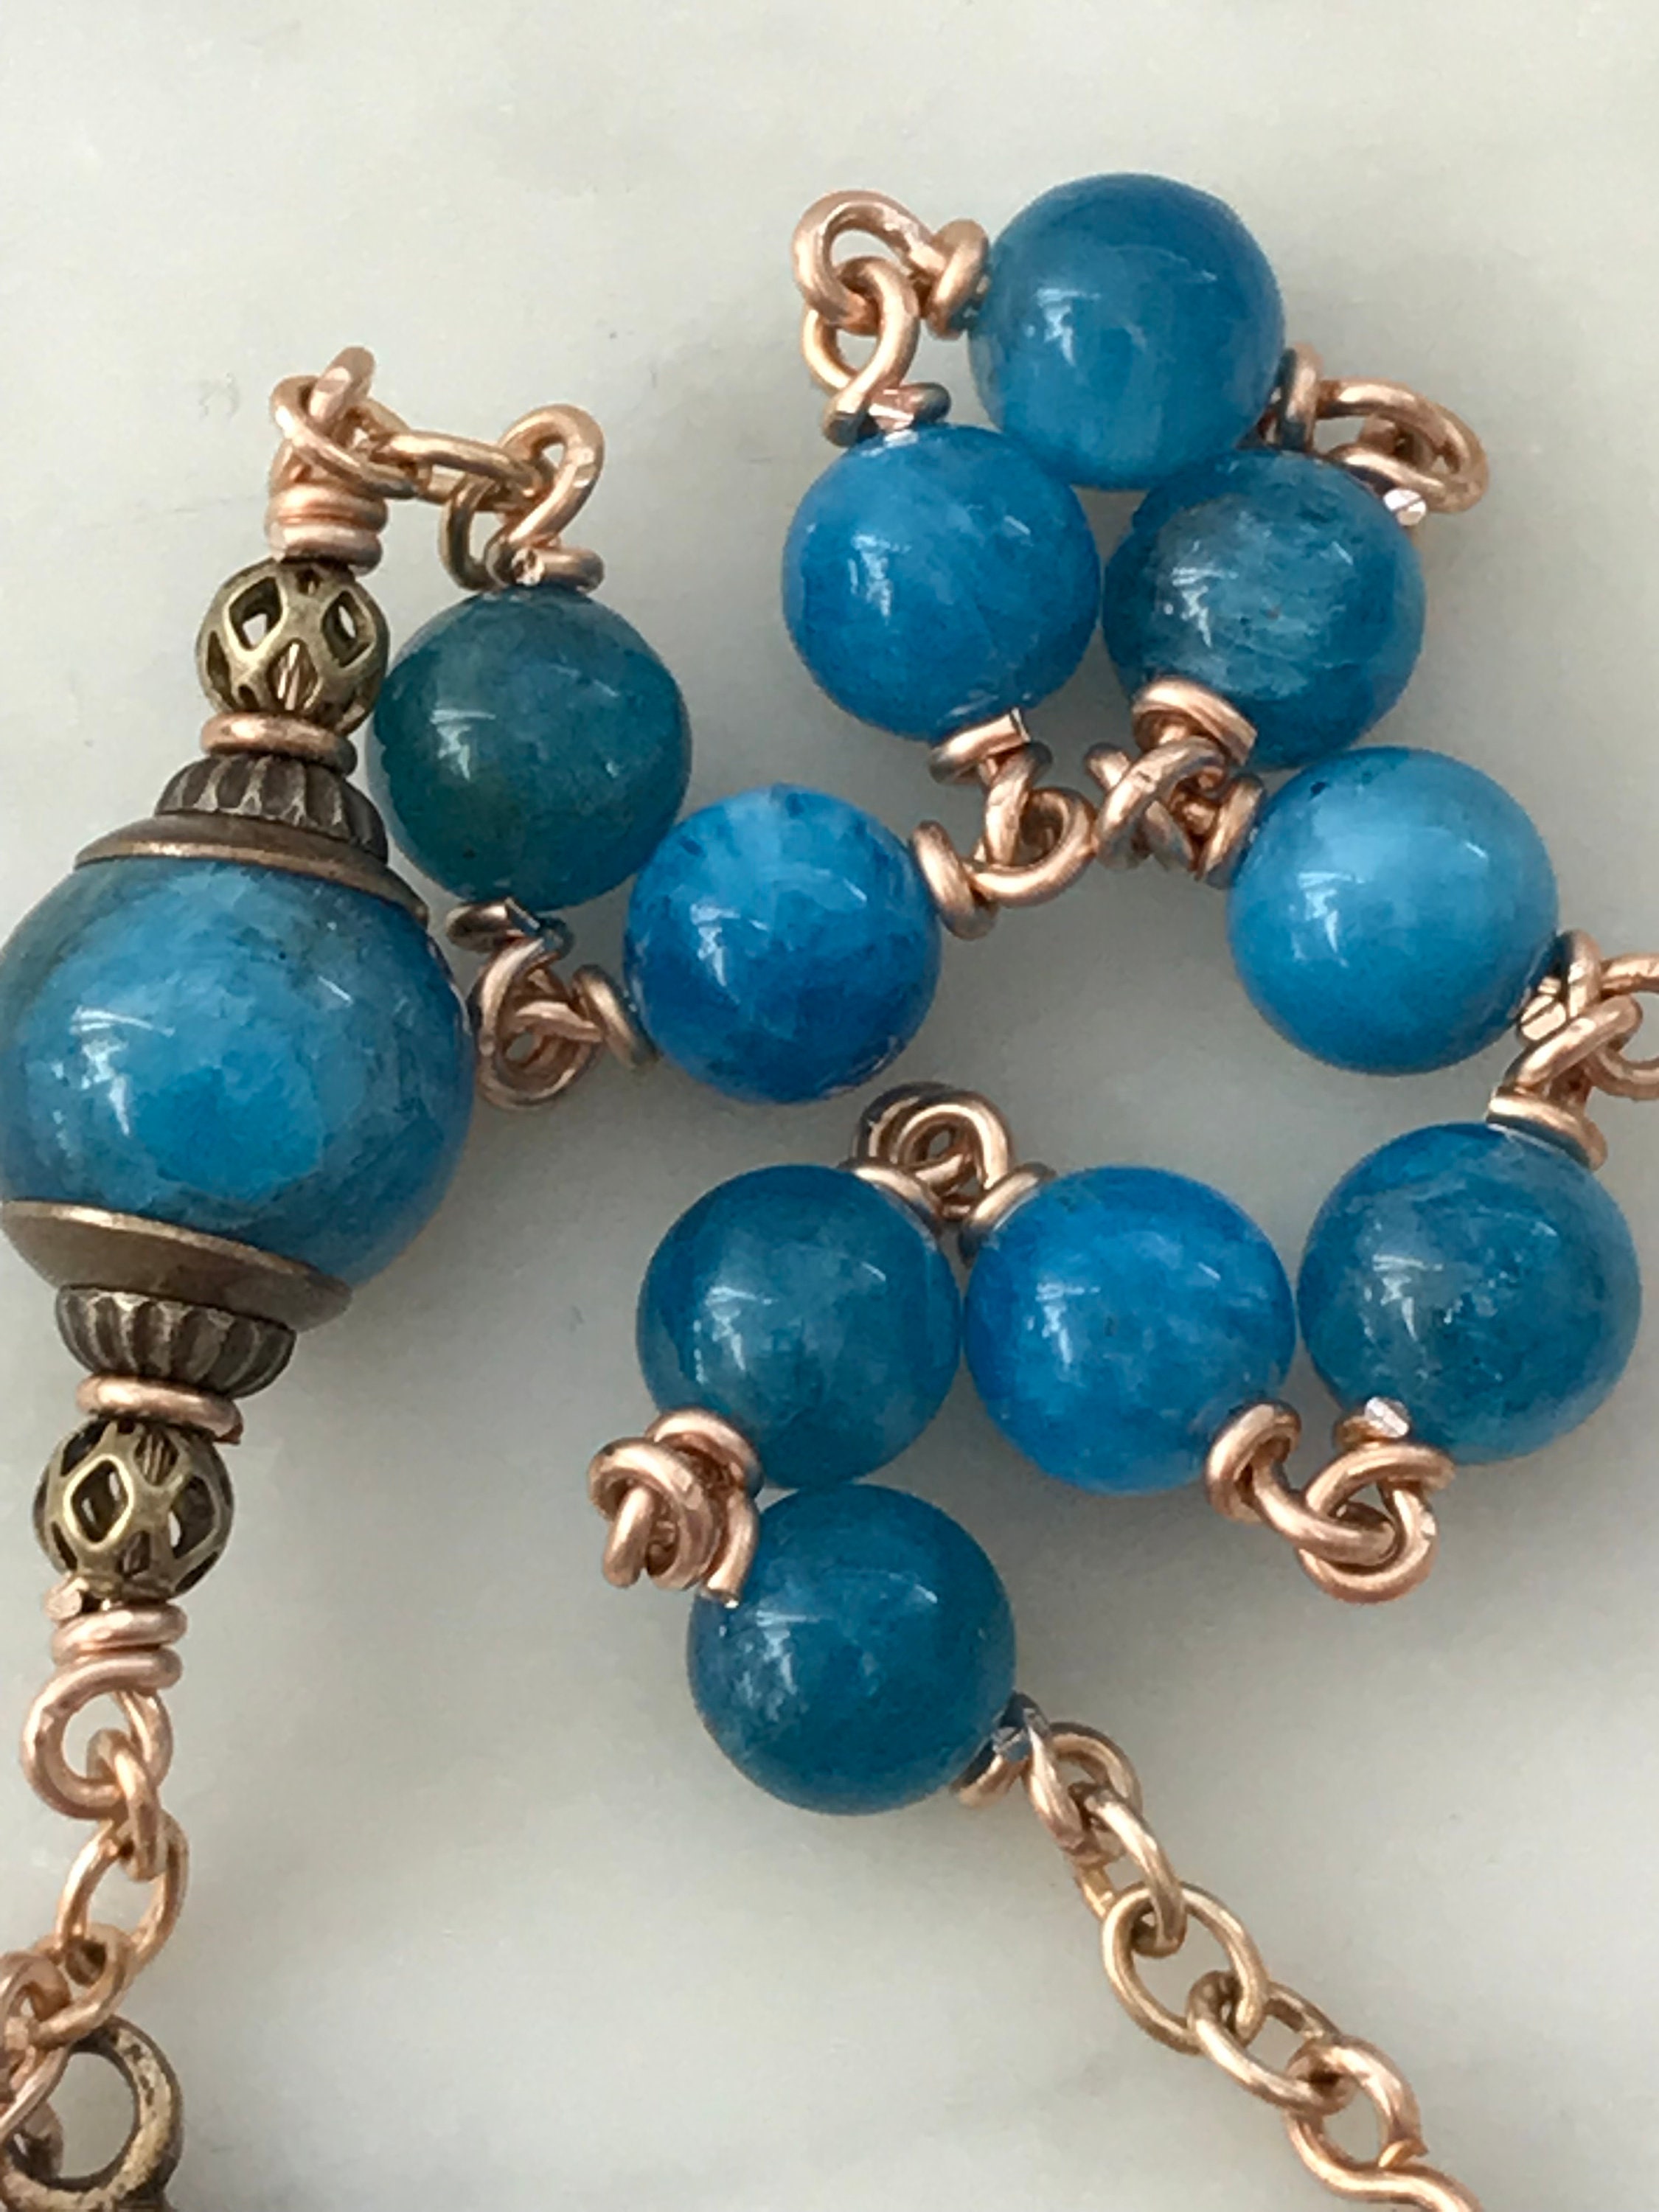 Pocket Rosary Our Lady of Good Counsel Saint Augustine - Etsy